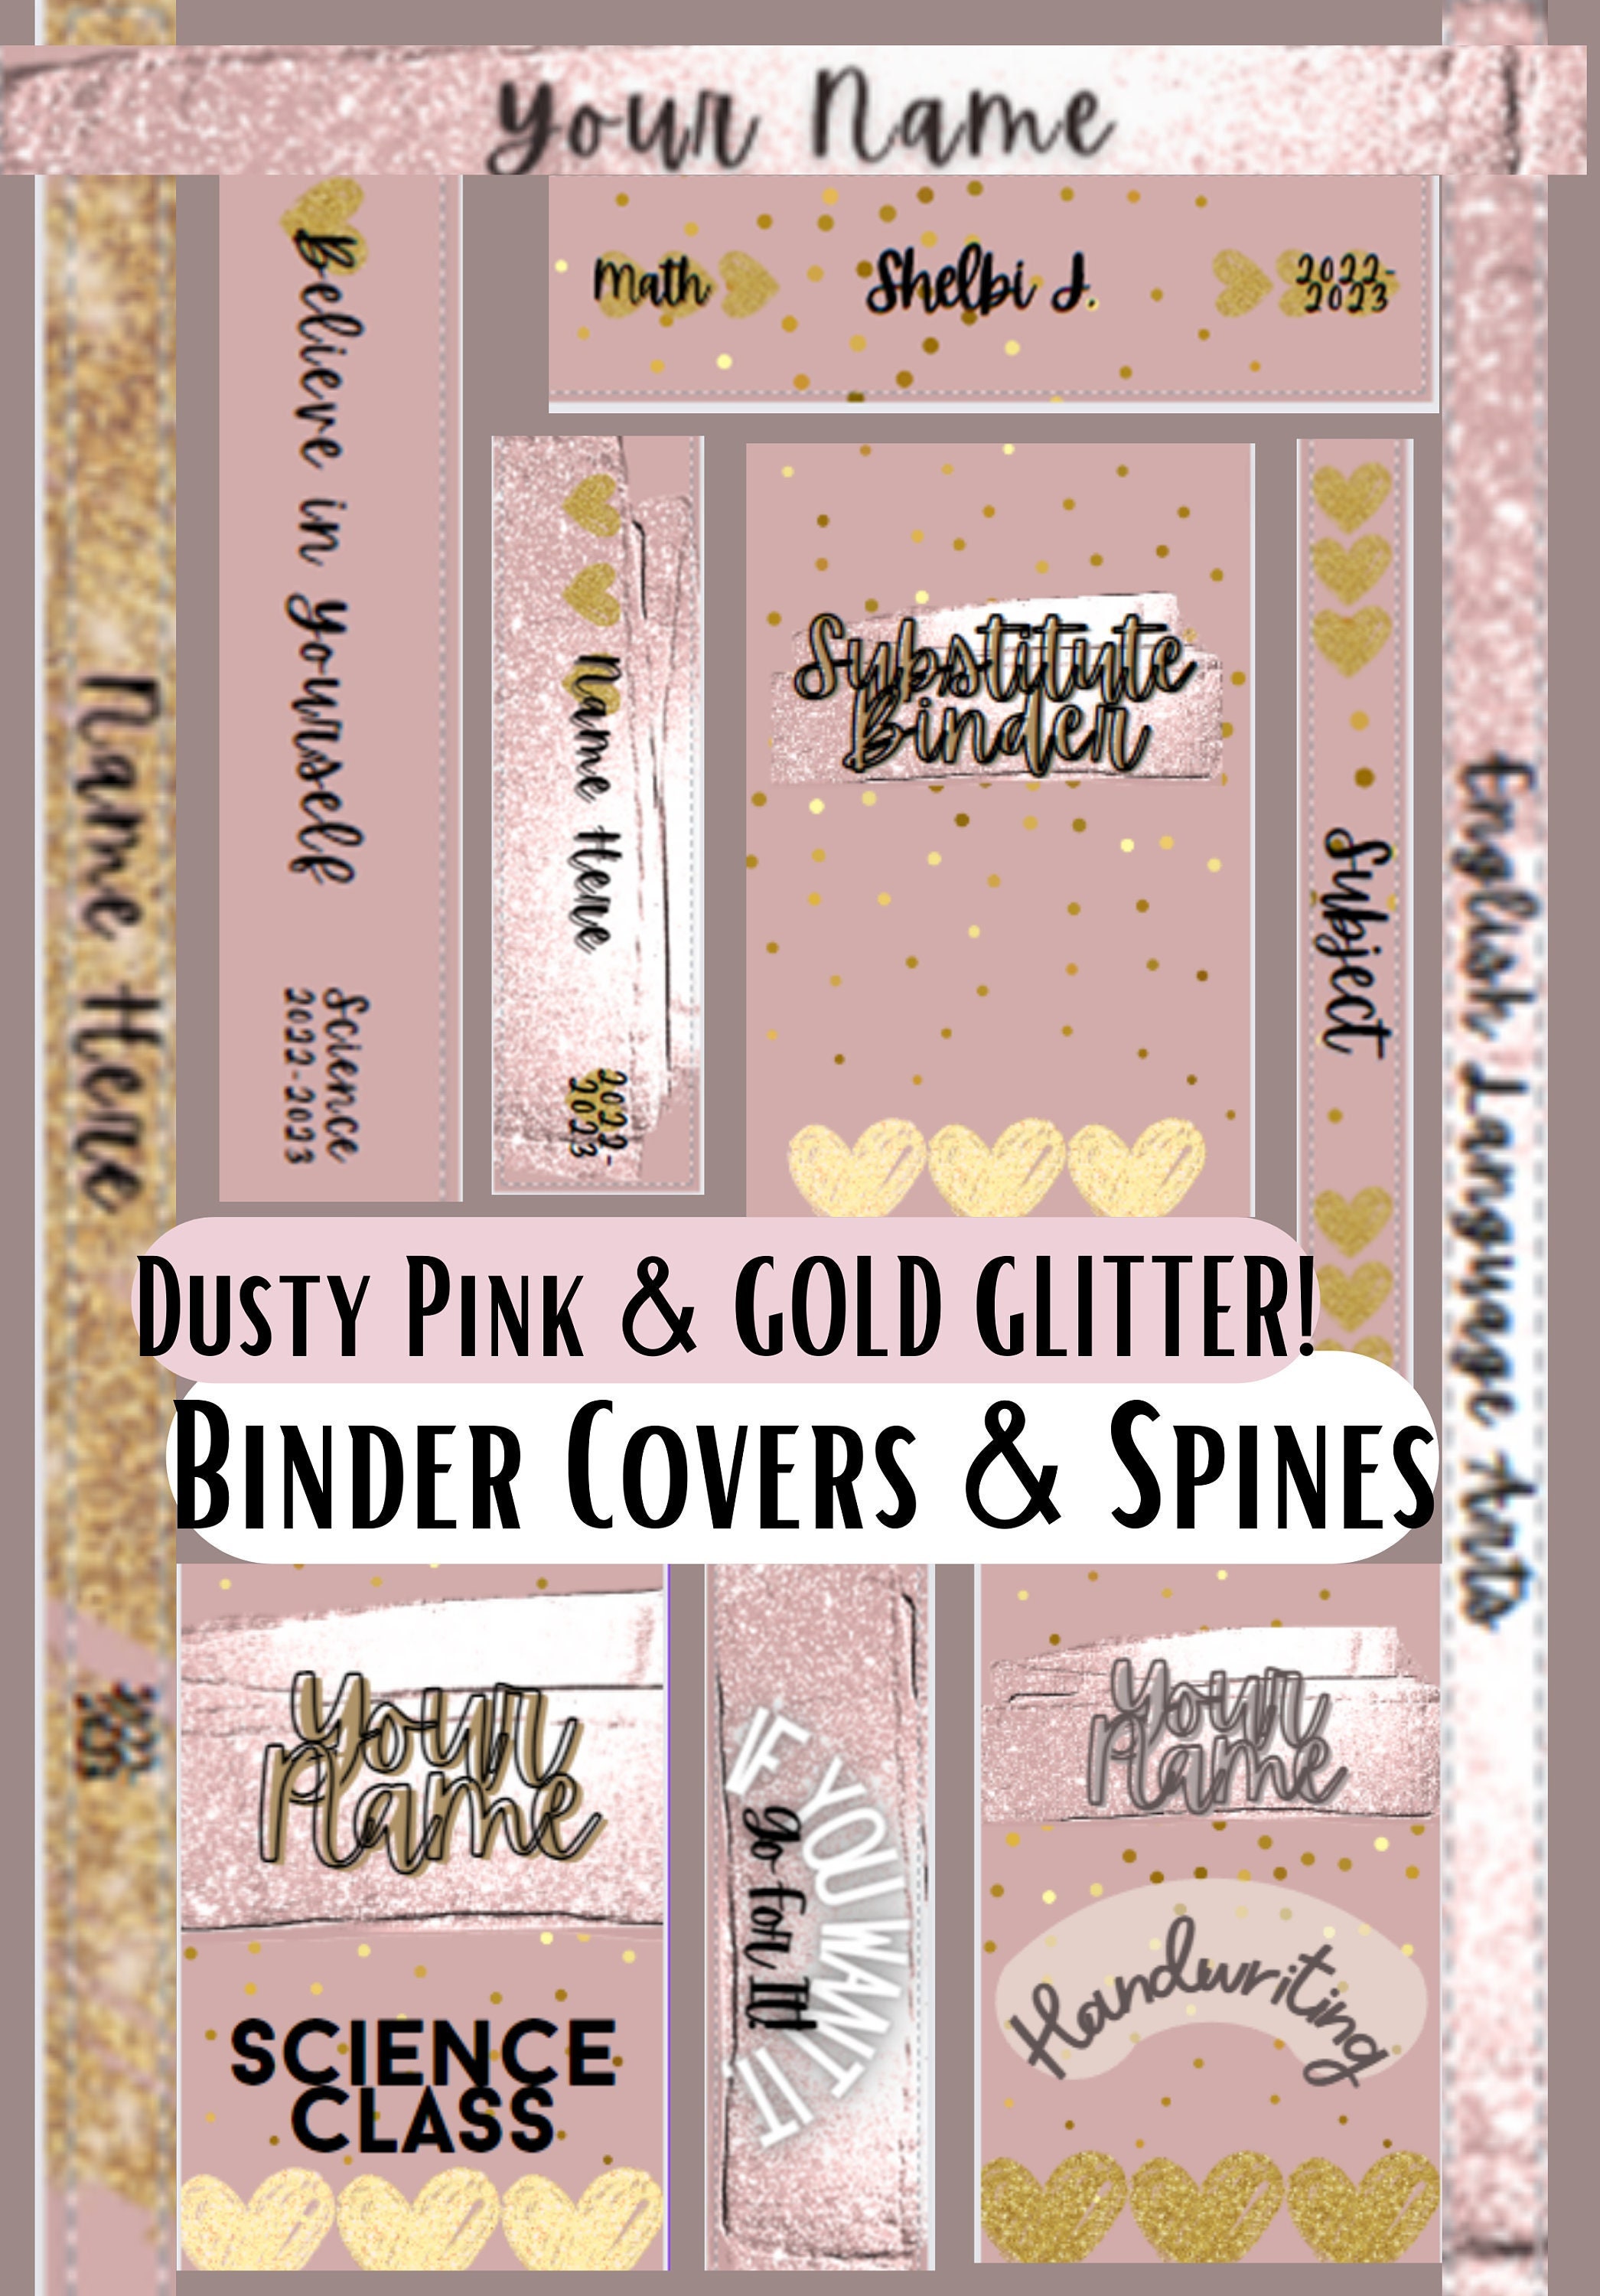 Paper Junkie RNAB093SDBMB3 2 pack sparkly pink 3 ring binder with 2 inch  rings, glitter file folder pockets for office supplies, planner, portfolio,  350